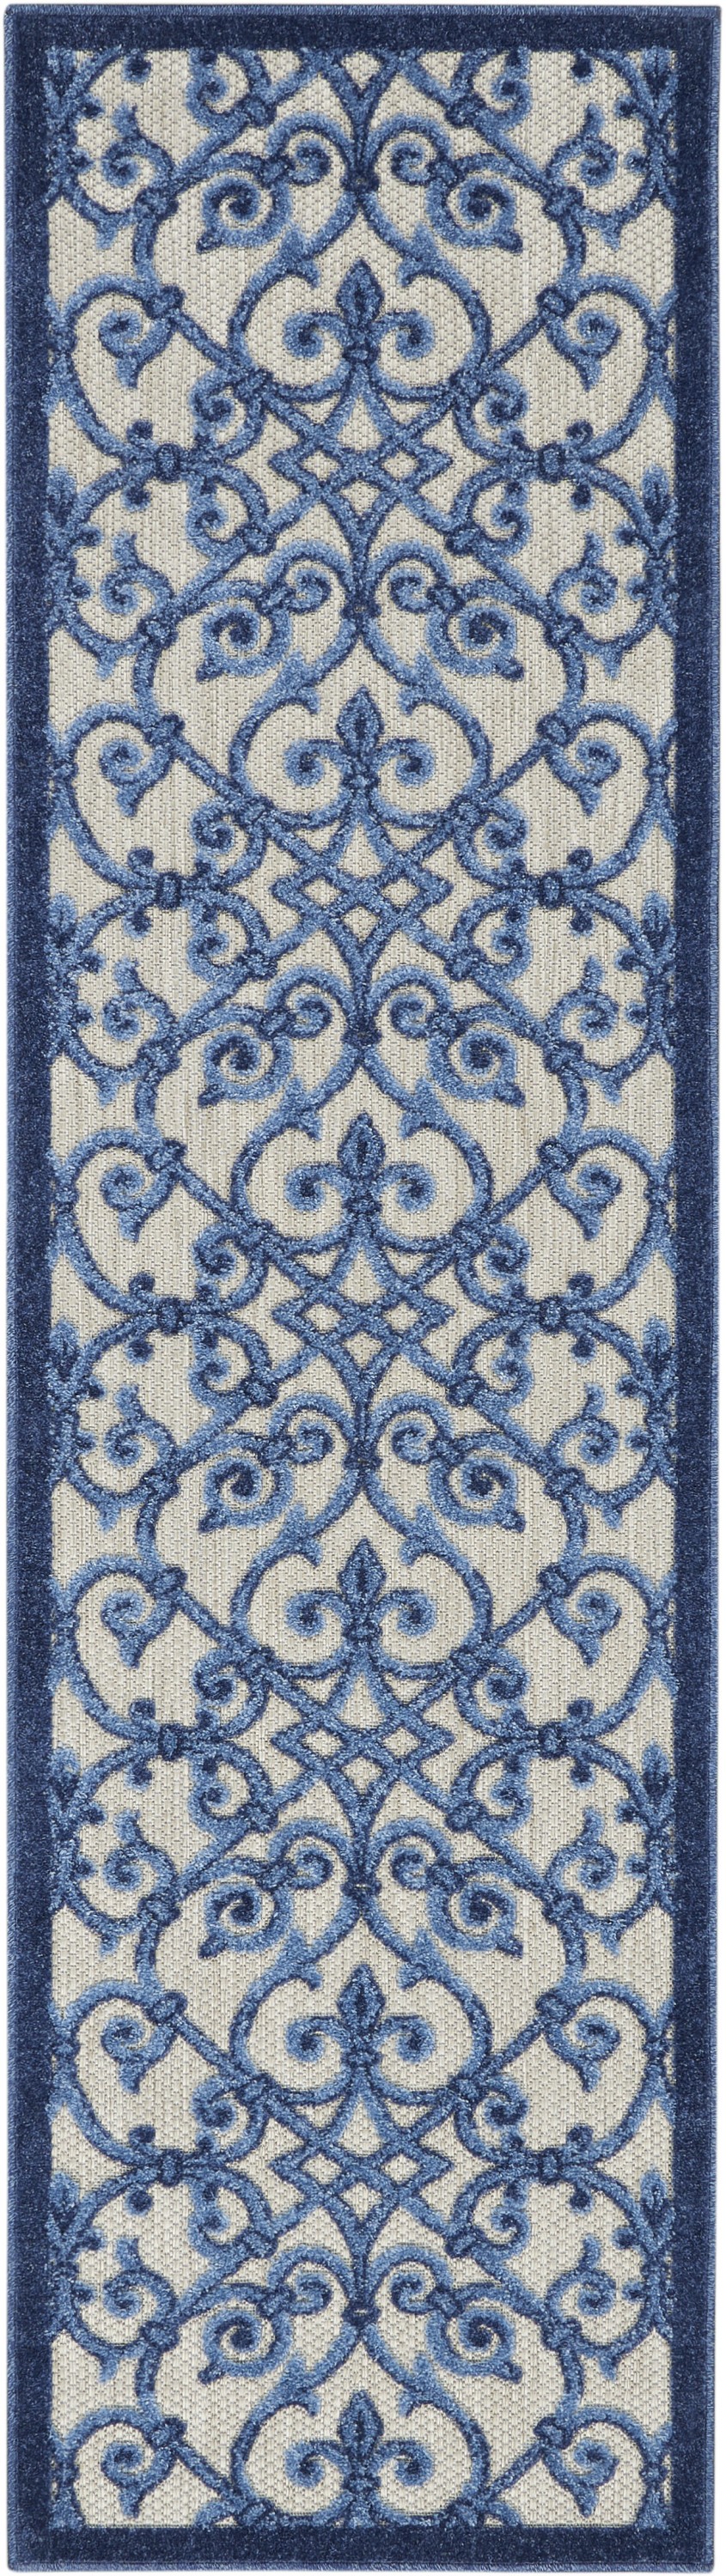 2' X 8' Blue And Gray Floral Indoor Outdoor Area Rug-385004-1